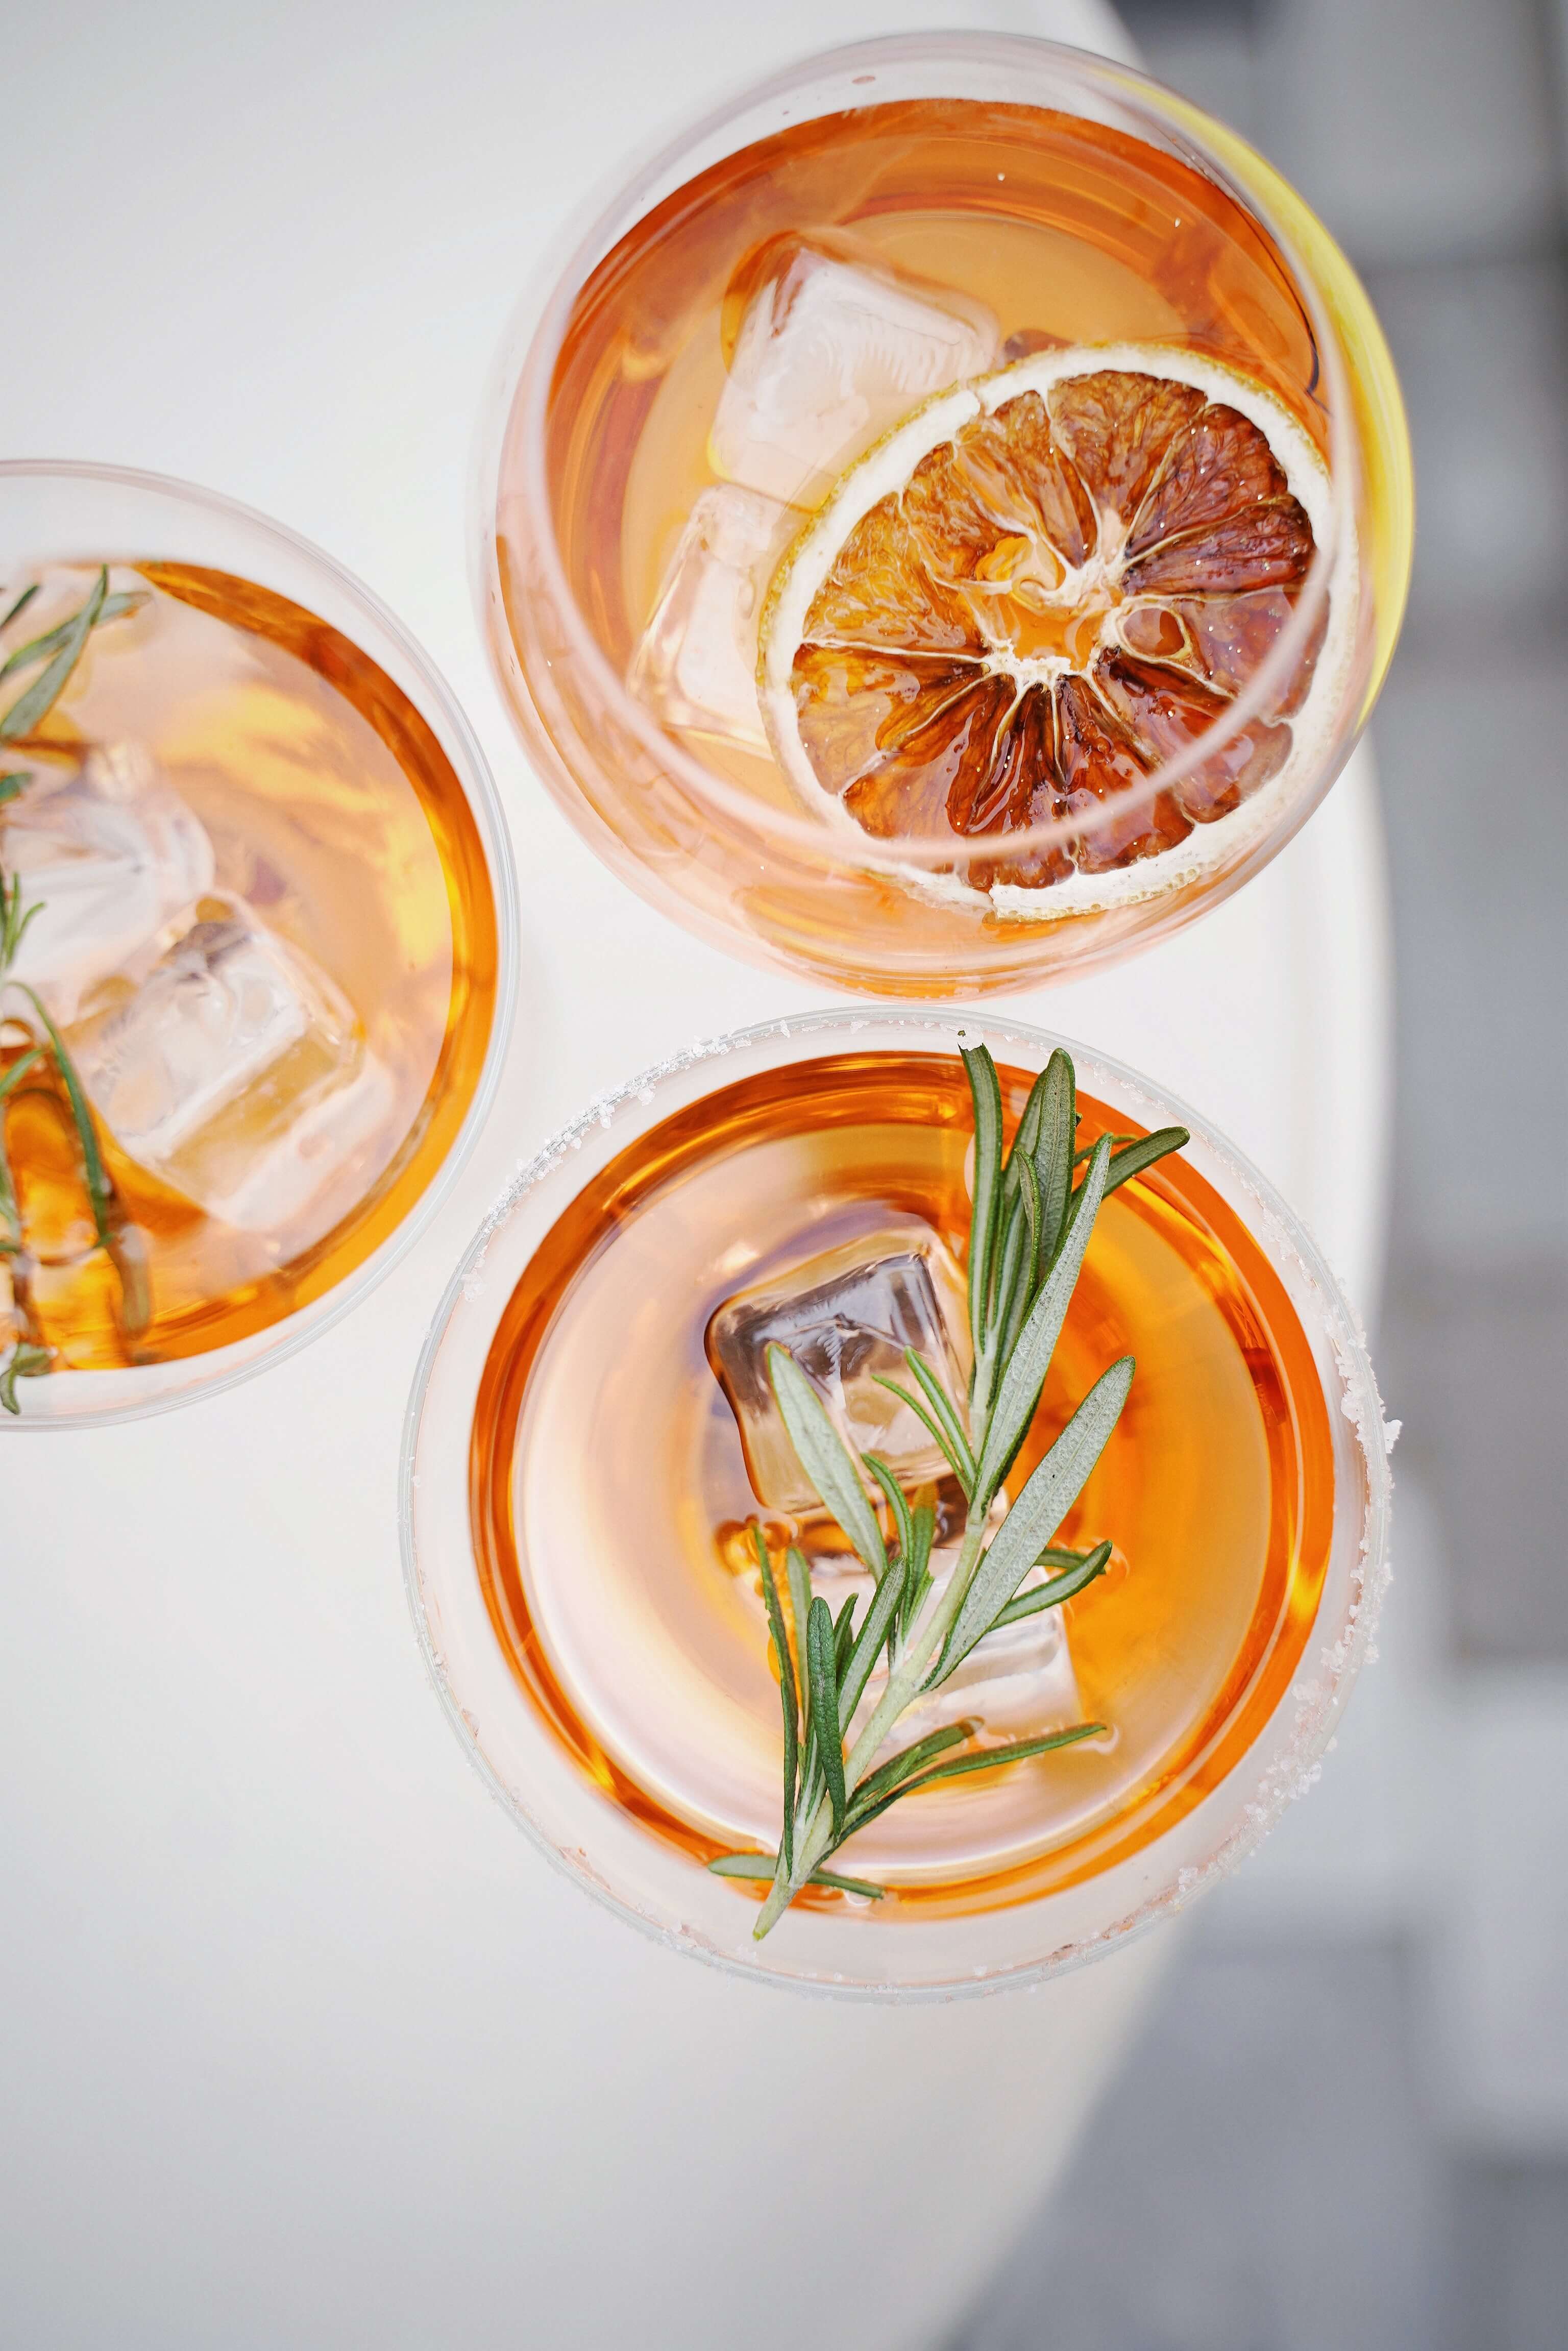 An image of cocktails show how to infuse liquor with Herbs and Spices.